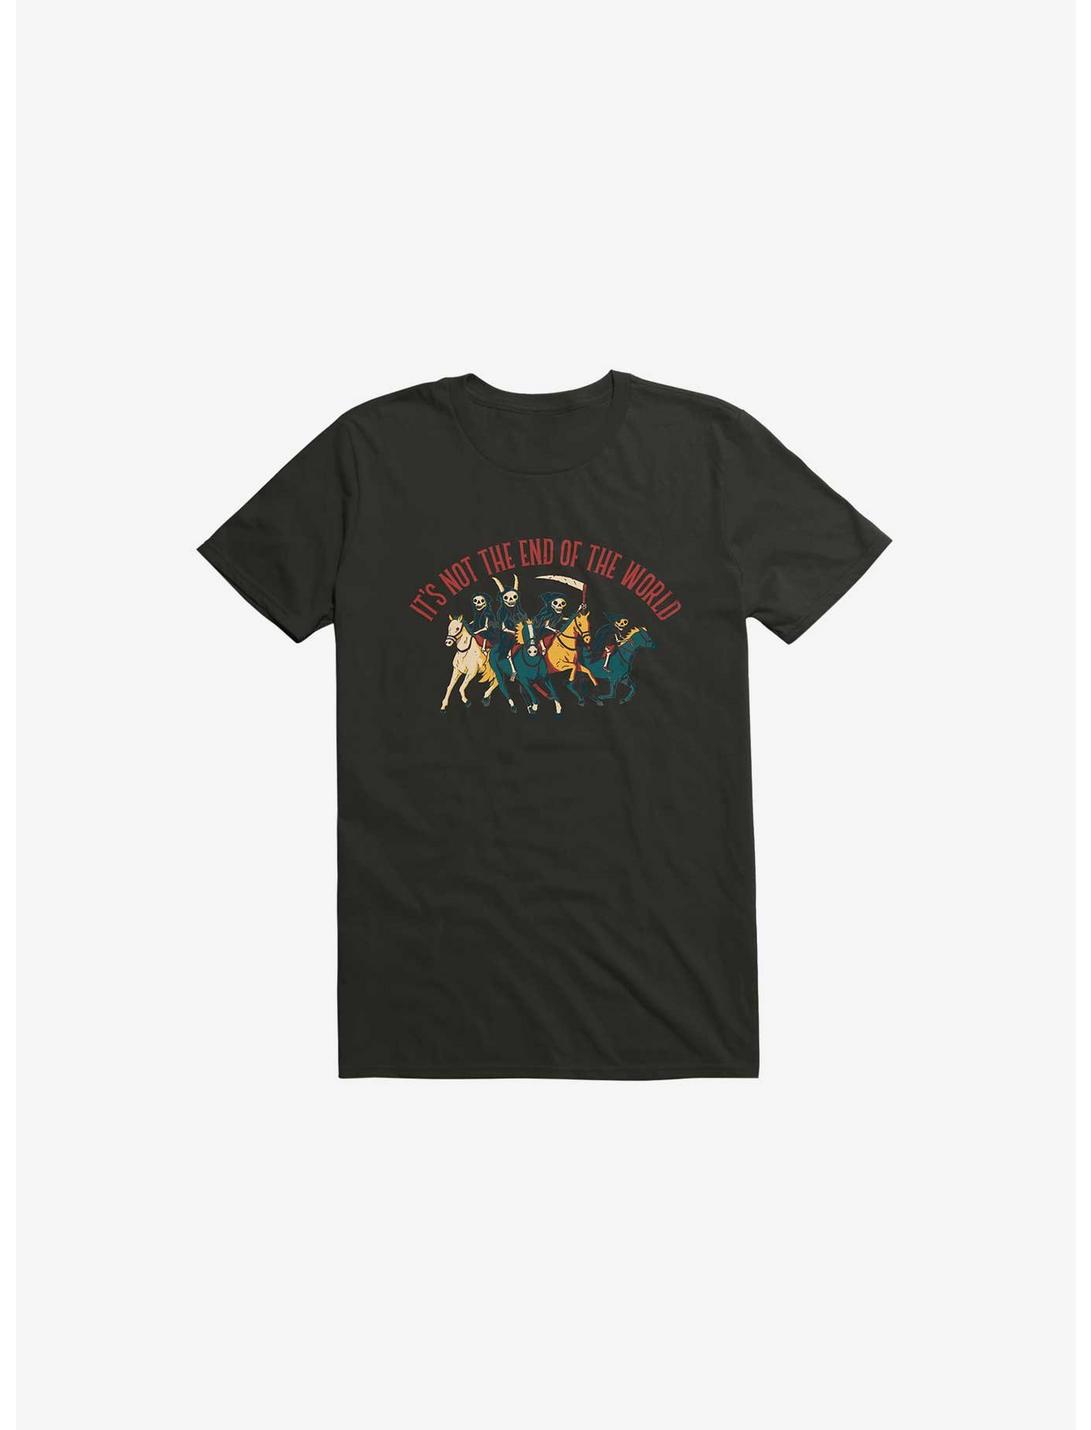 Not The End Of The World T-Shirt, BLACK, hi-res